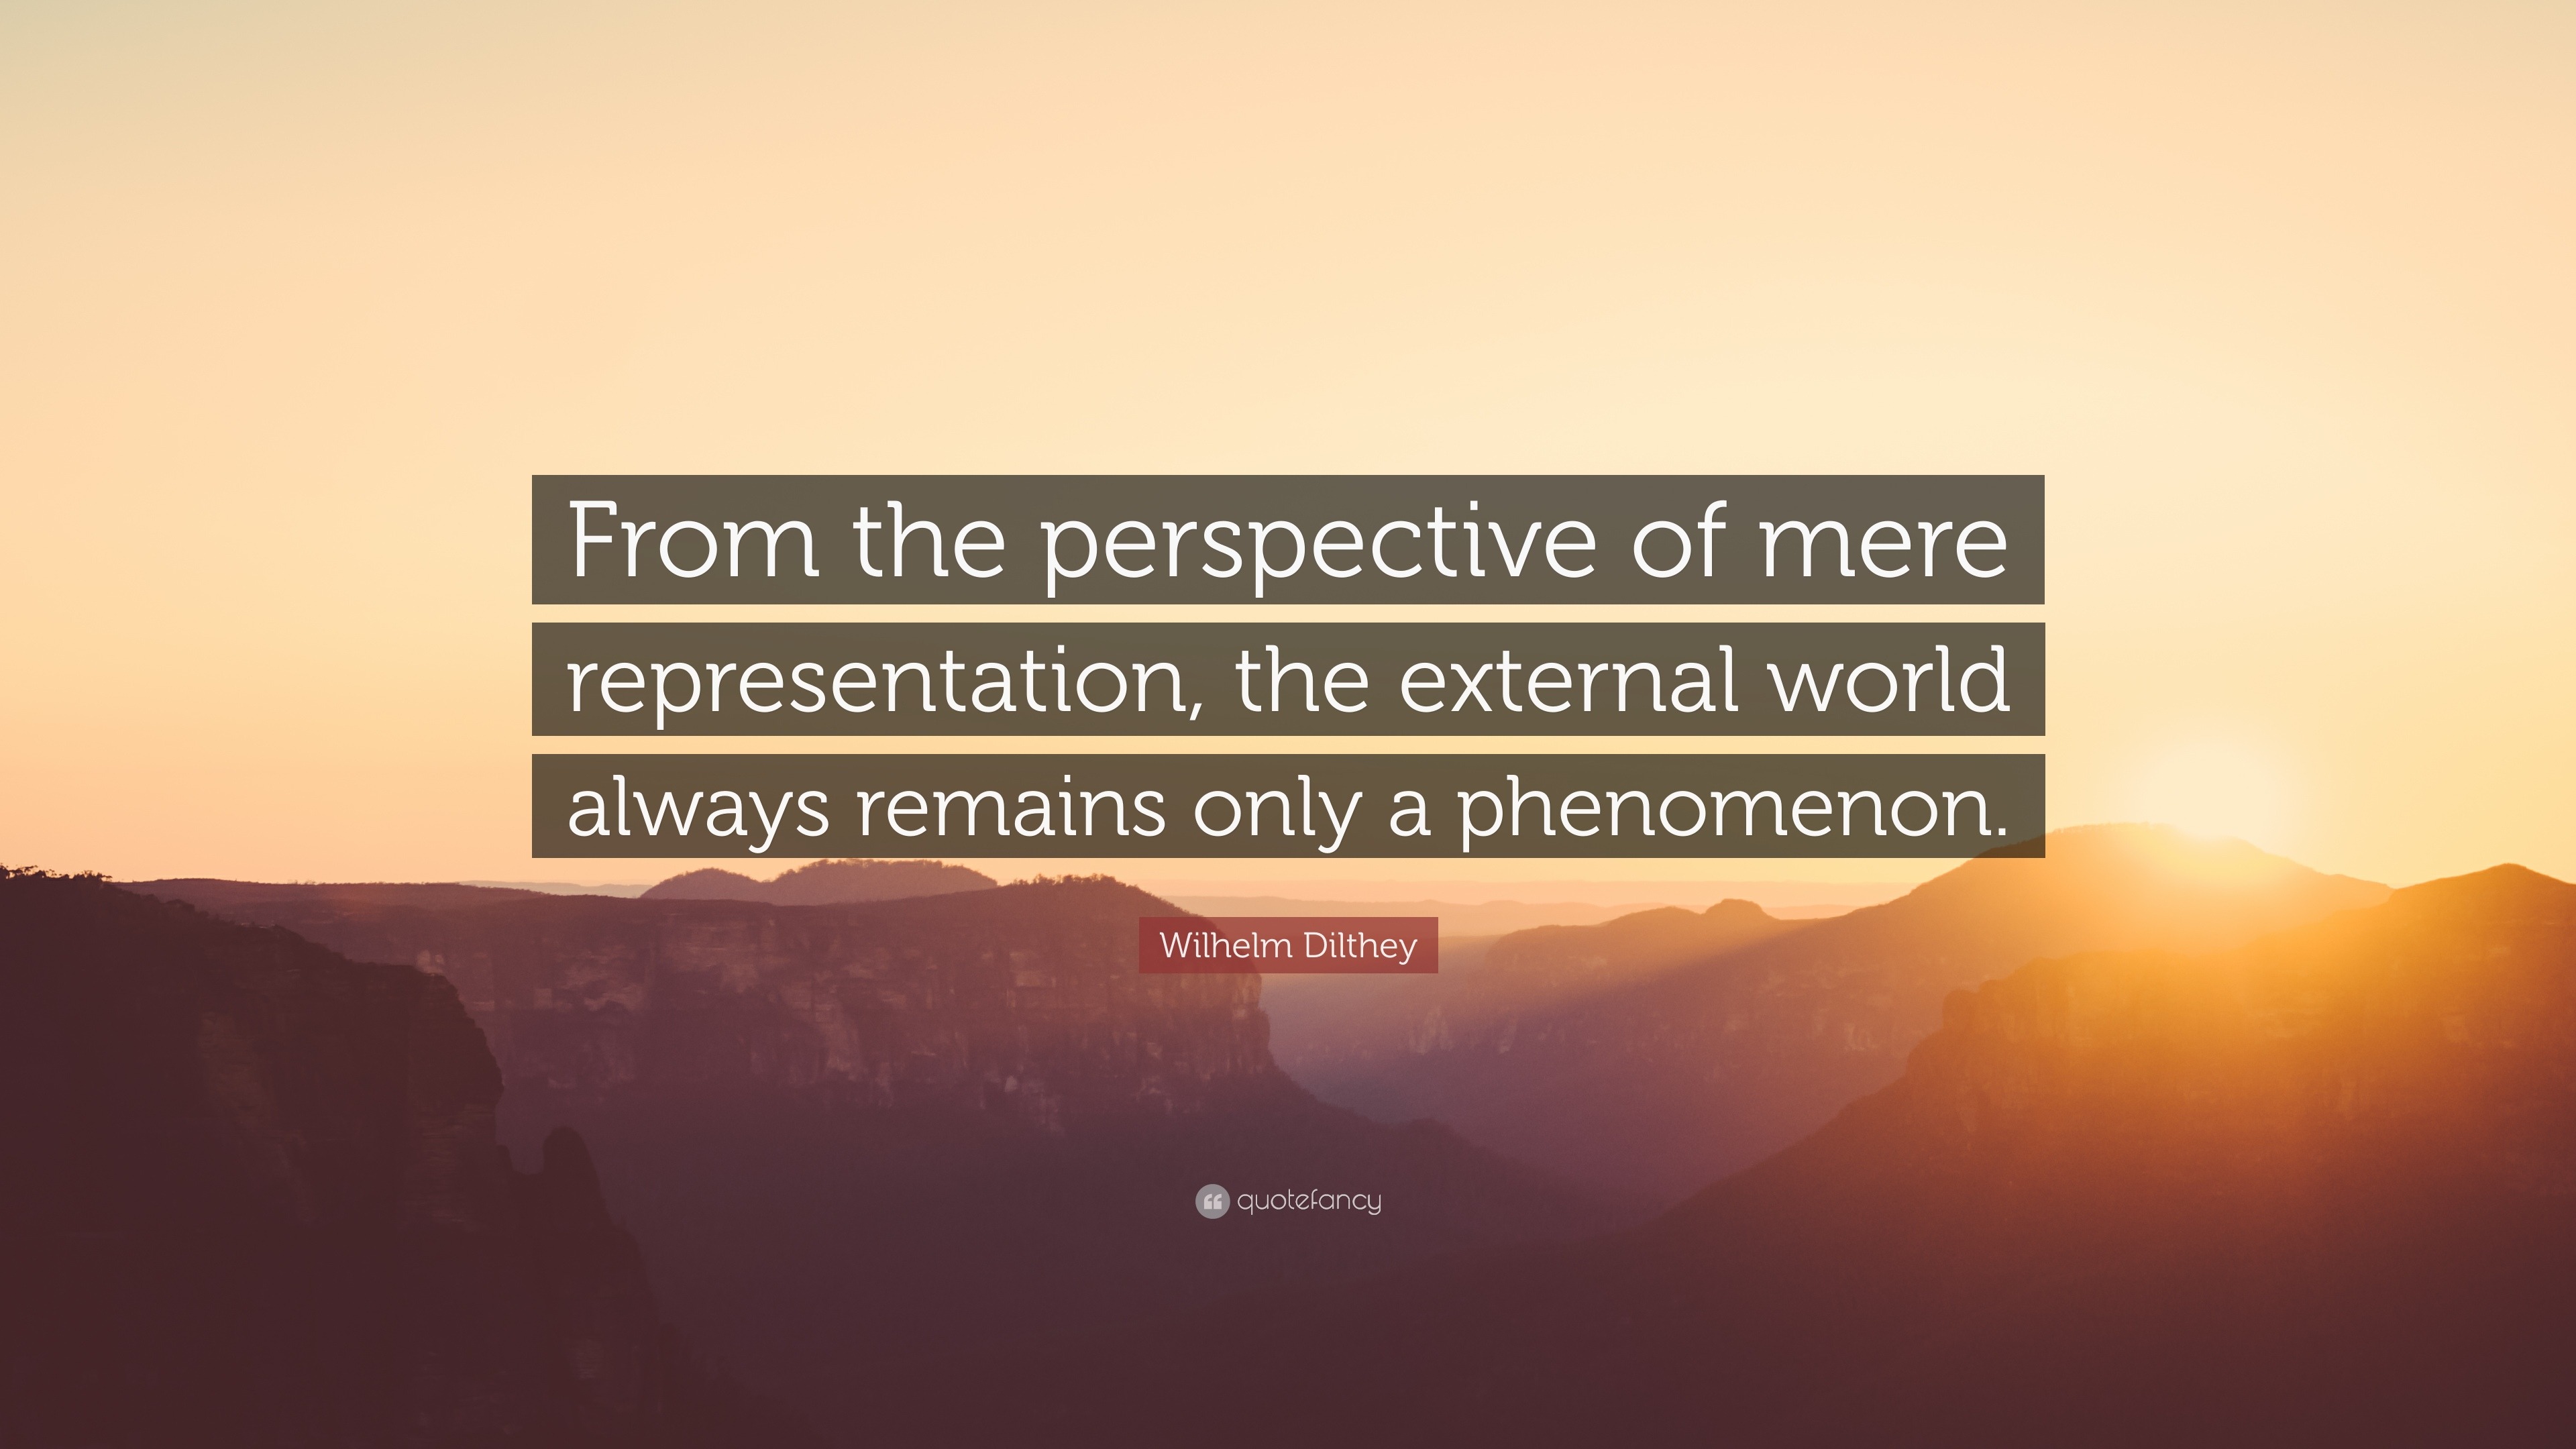 meaning of mere representation